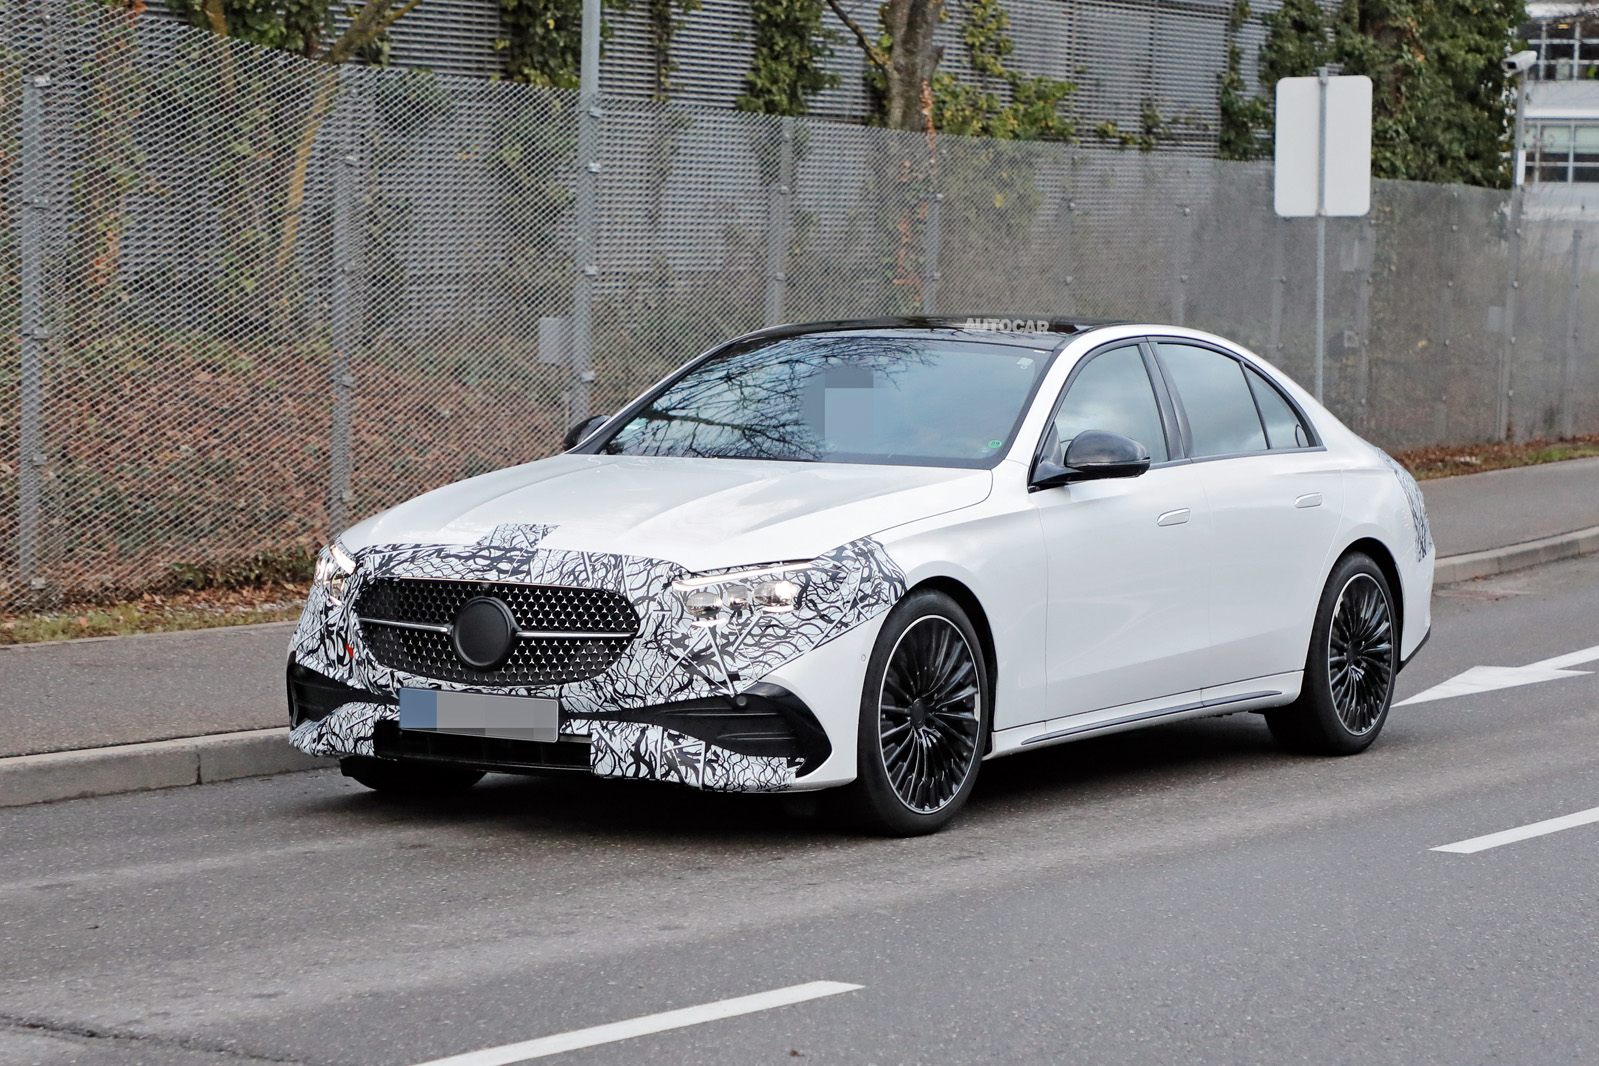 Next-generation Mercedes-Benz E-Class to arrive in 2023